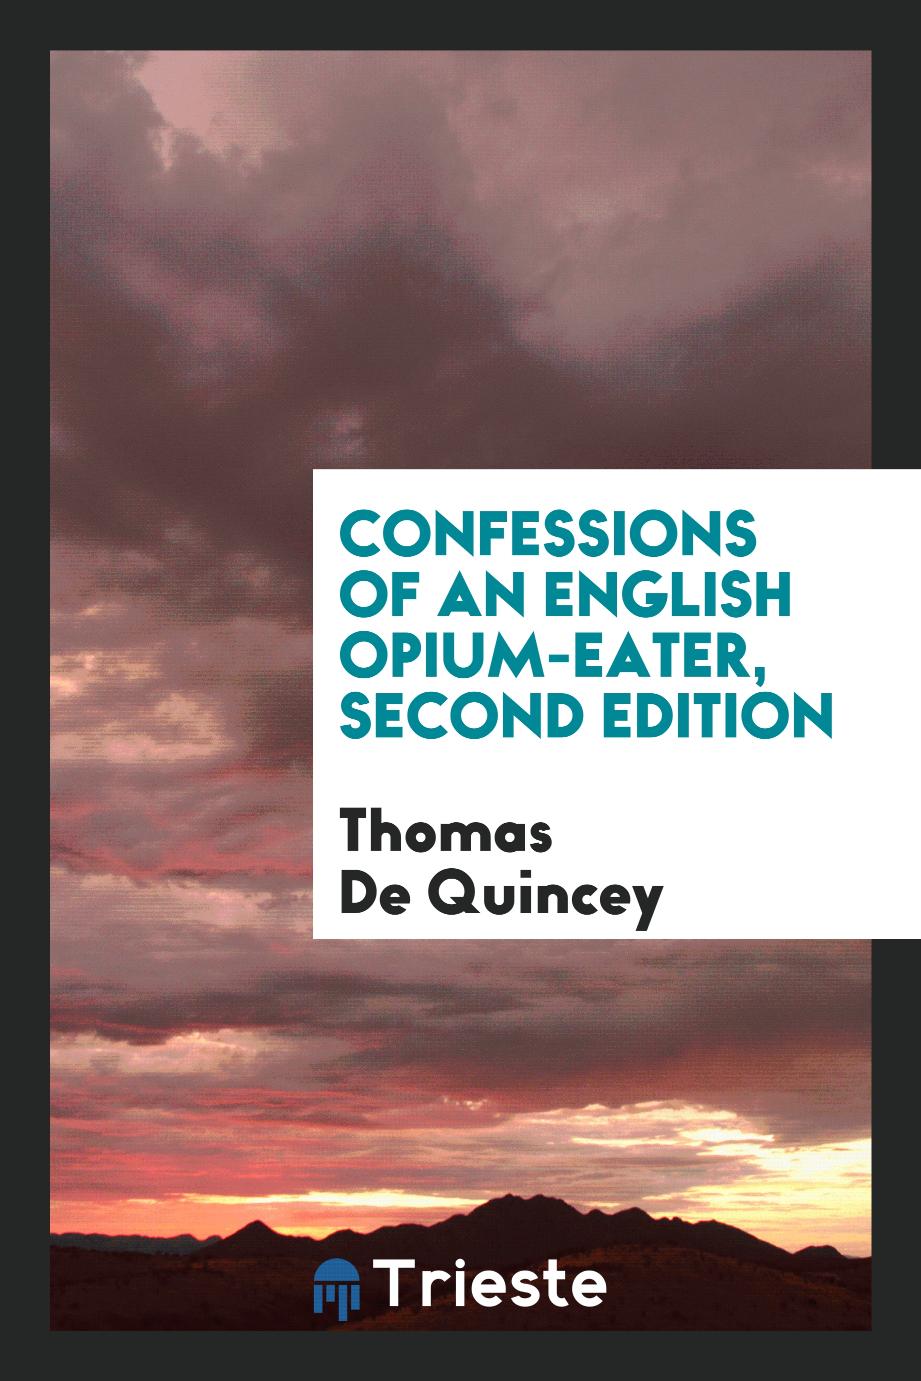 Confessions of an English opium-eater, second edition